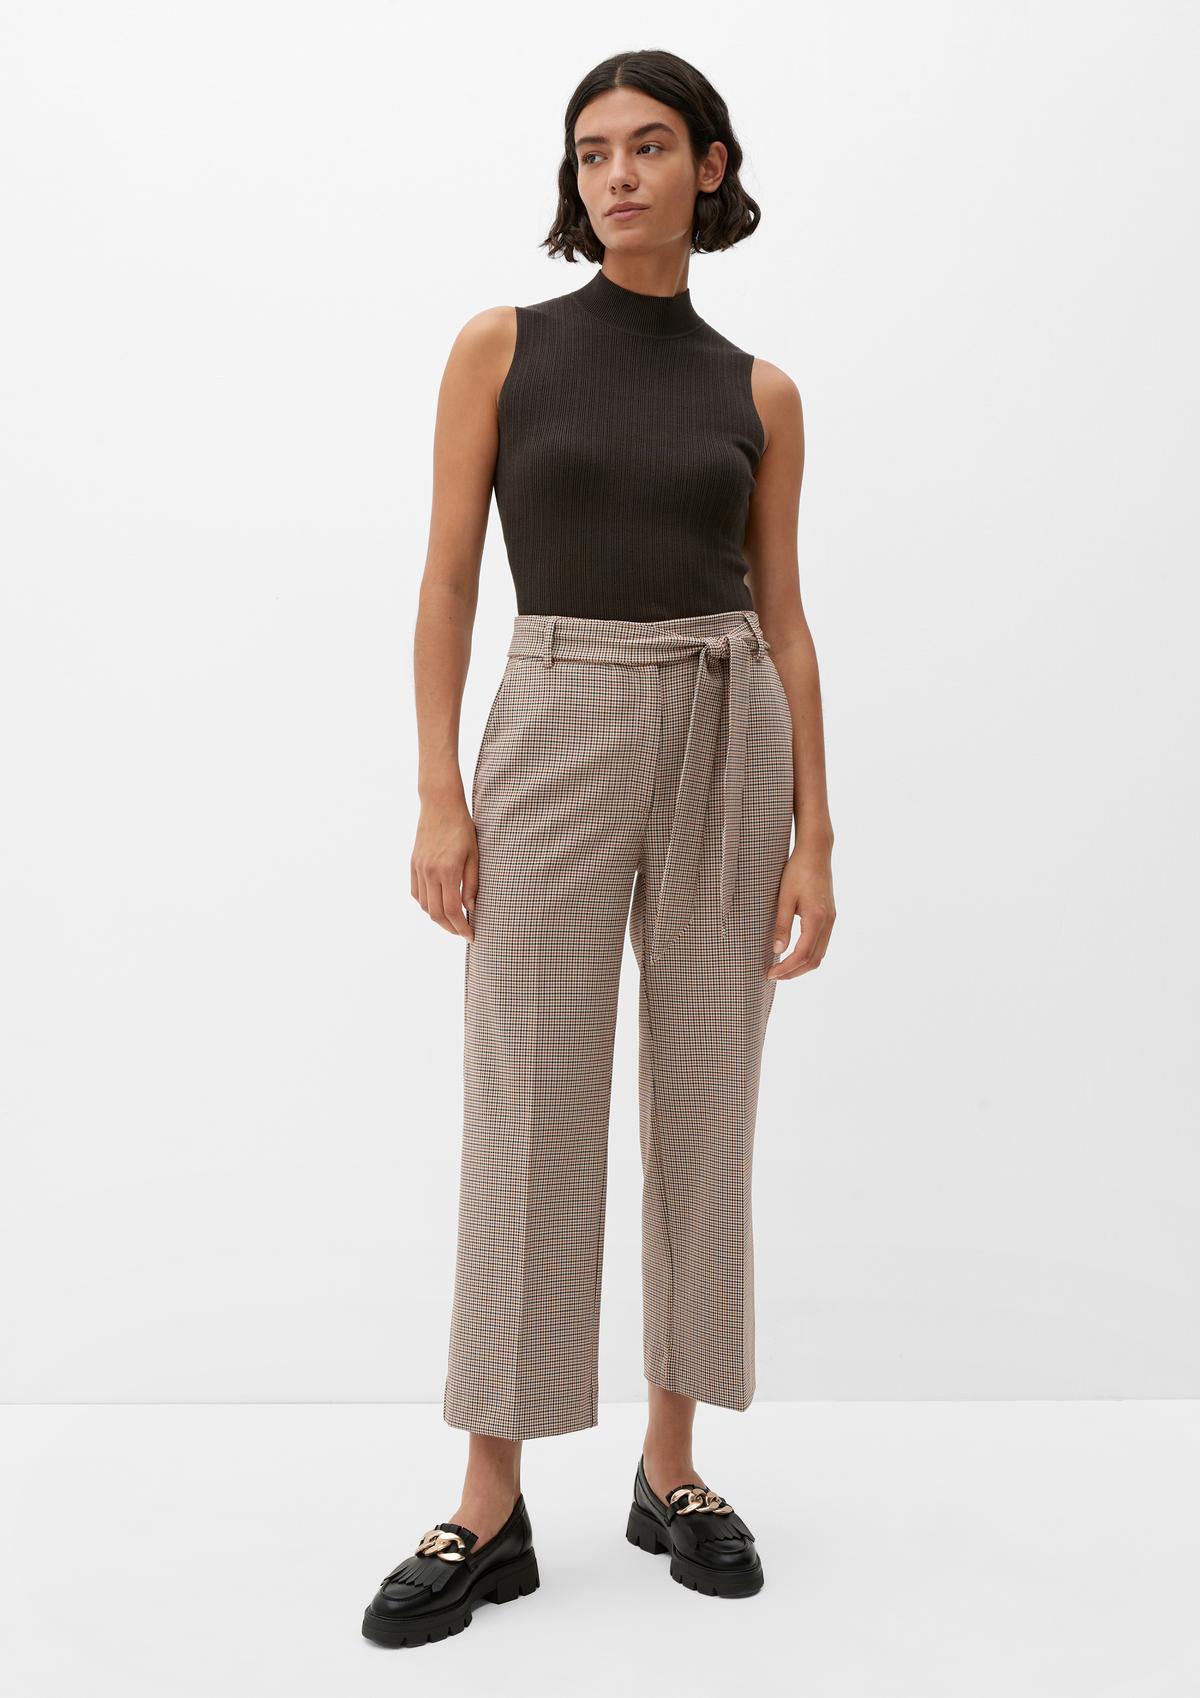 Culottes: Order now in the shop online